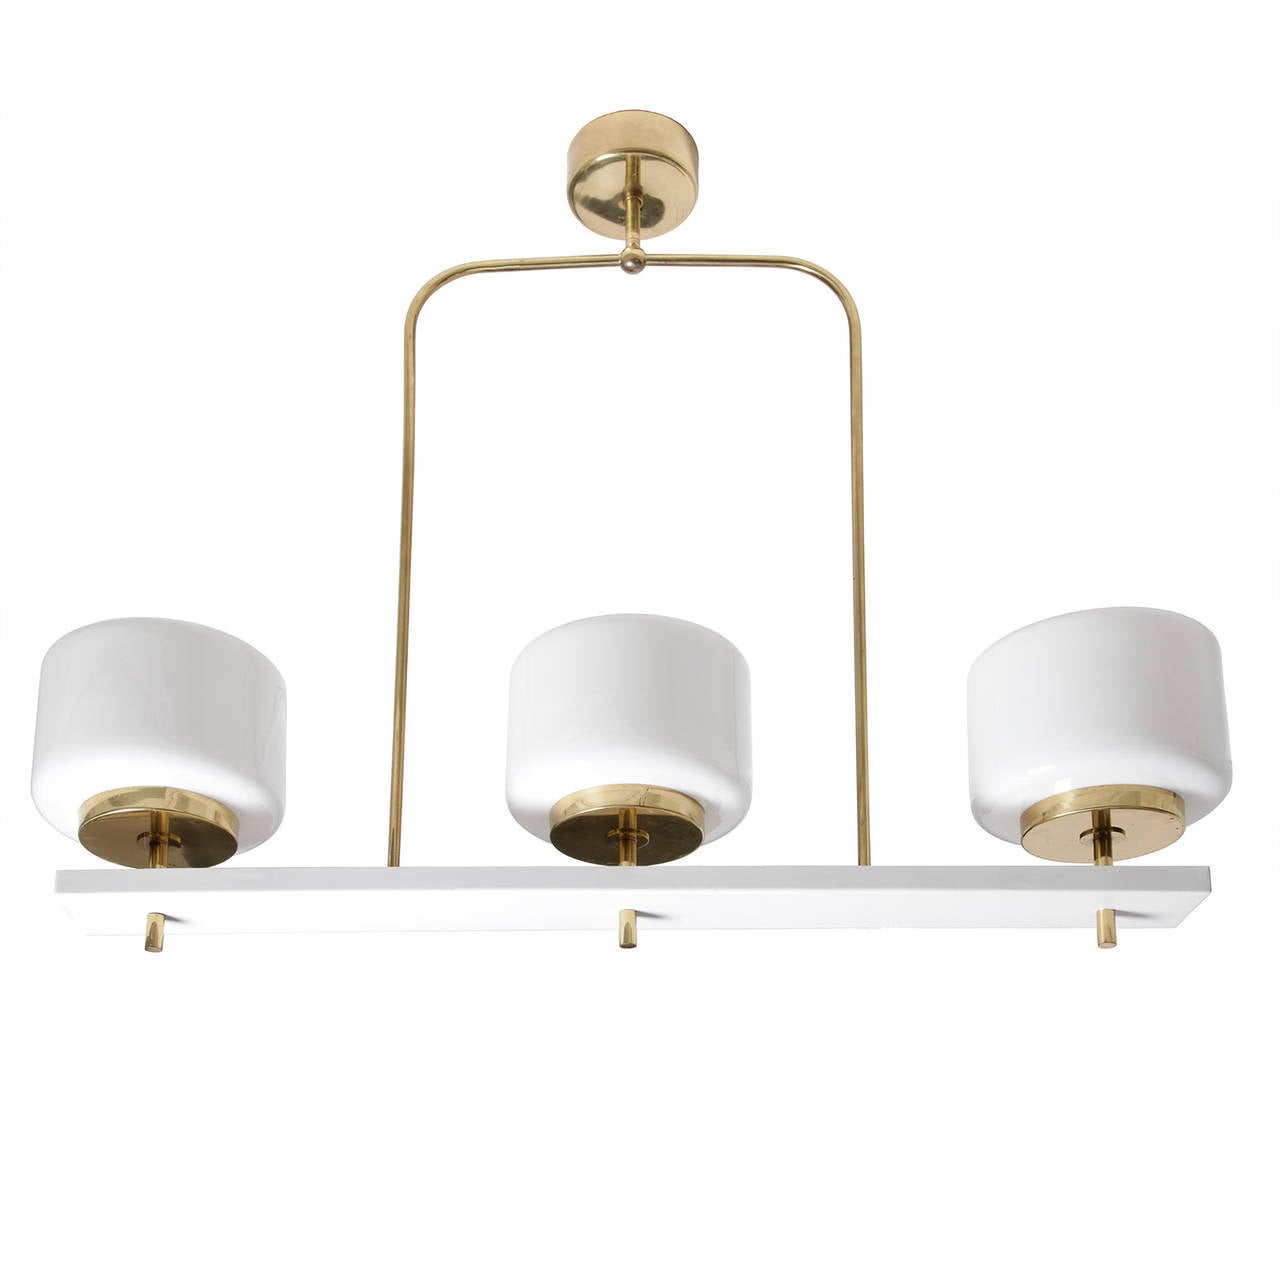 A three-shade chandelier in brass and painted metal with opal glass shades. Designed by Paavo Tynell for the Church Community Centre, Joensuu. Made by Idman, Finland. Two pieces available.